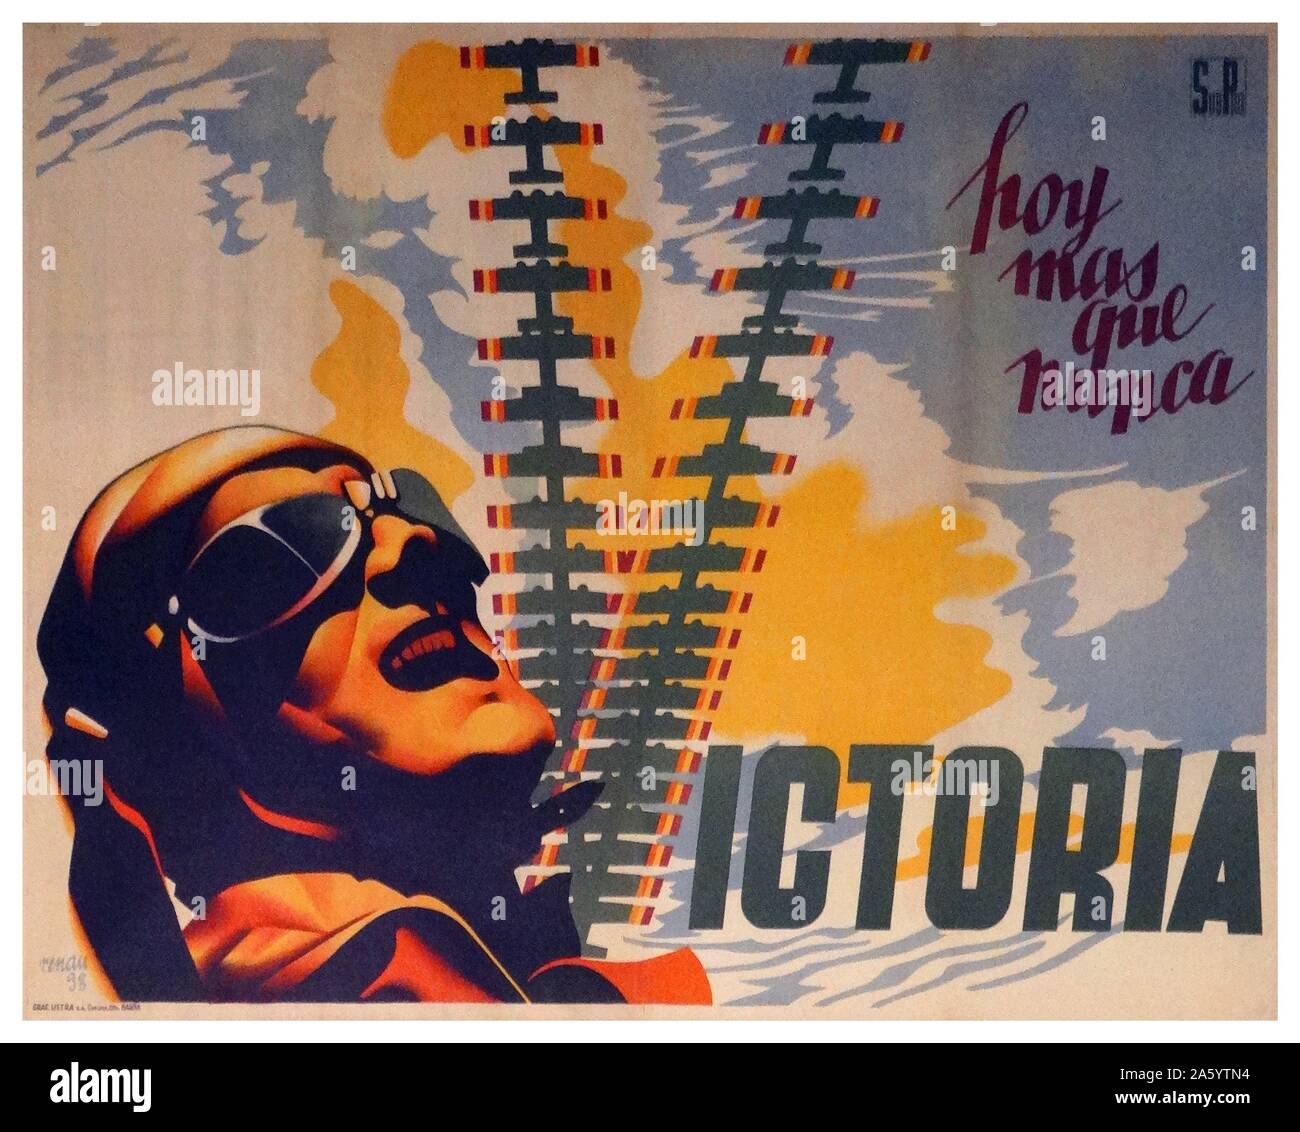 nationalist propaganda poster during the Spanish Civil War. 'today more than ever. Victory!' Stock Photo